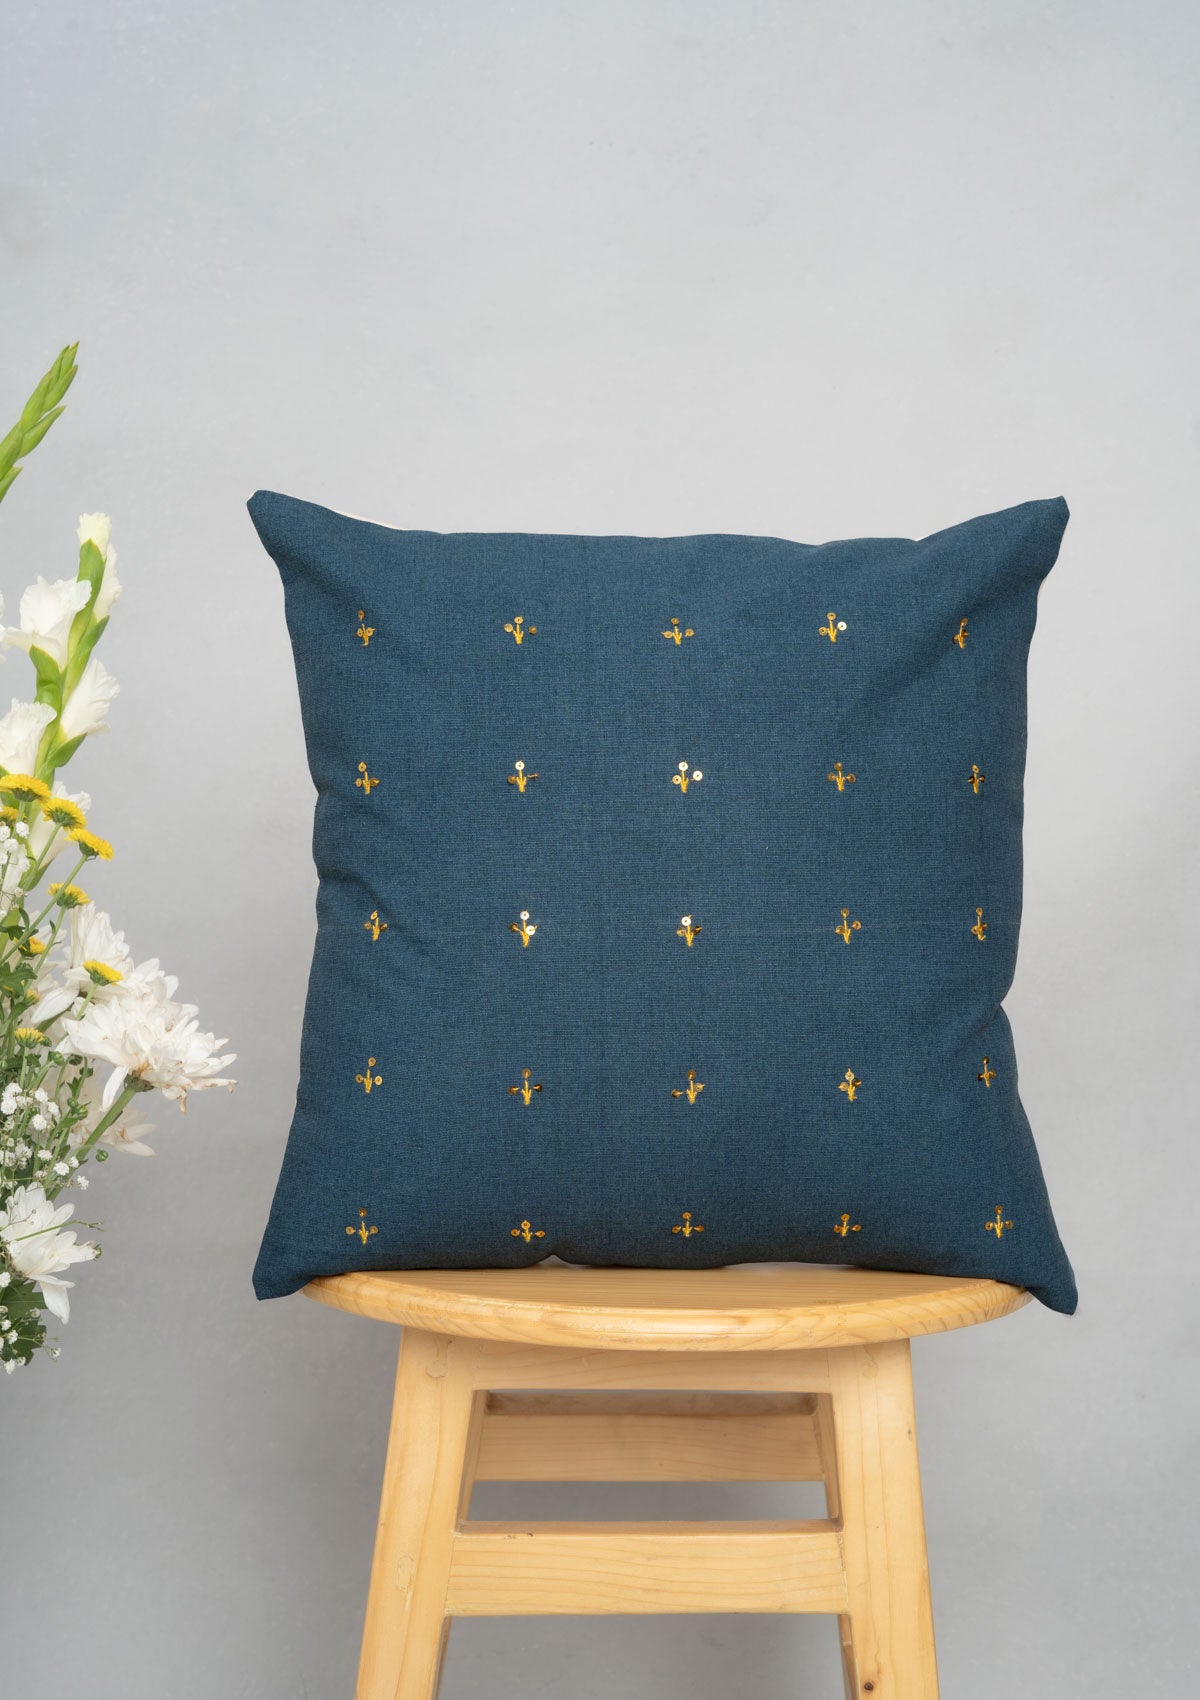 Kohinoor Sequined Cotton Cushion Cover - Night Blue